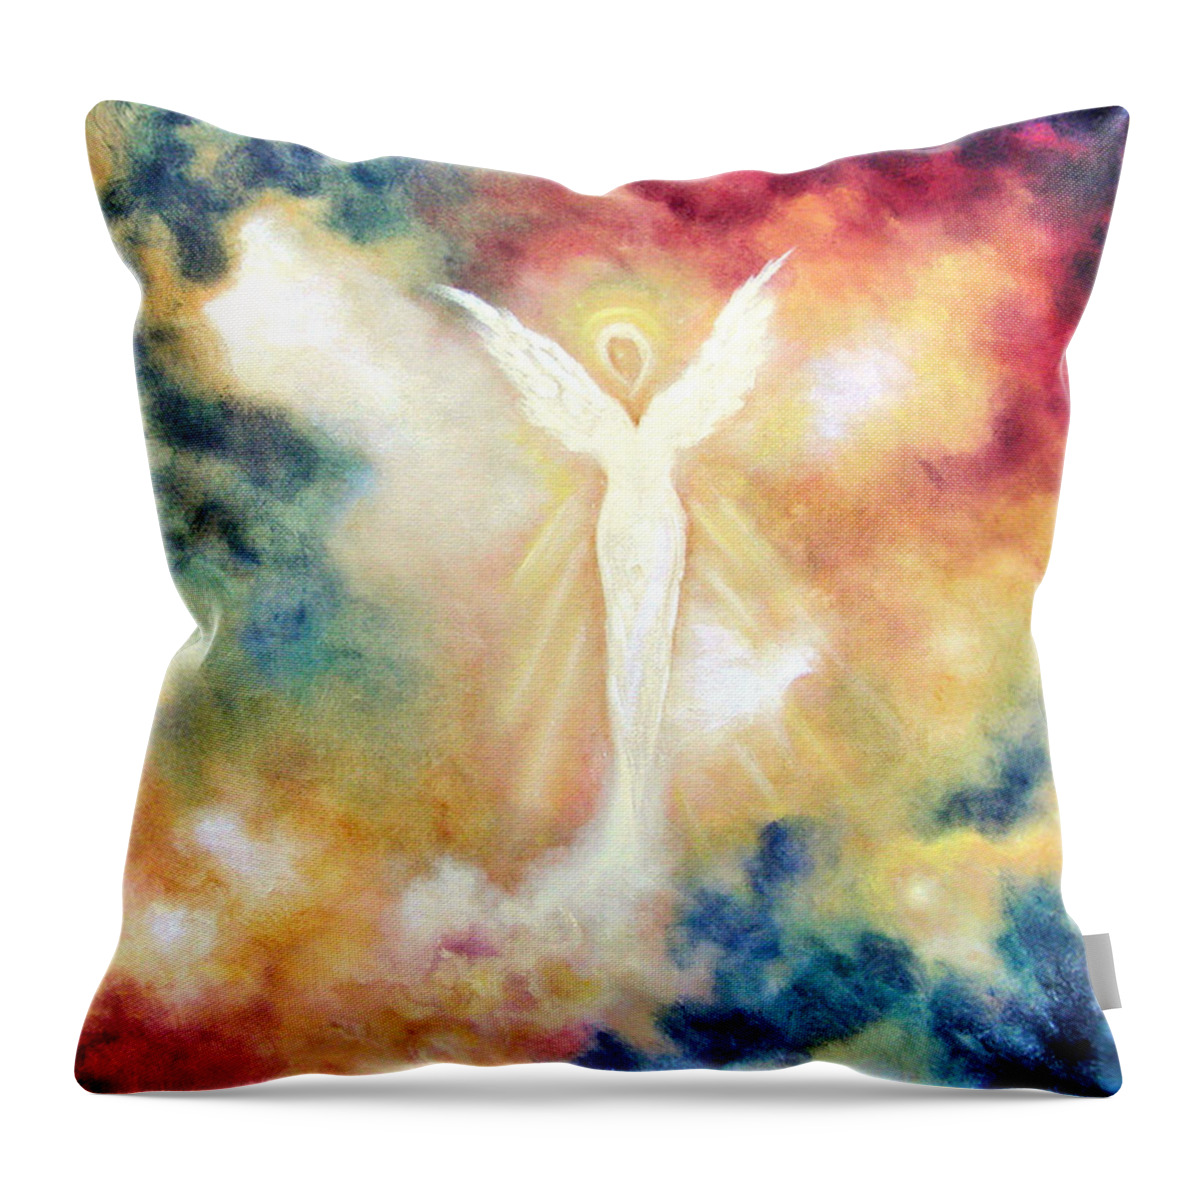 Angel Throw Pillow featuring the painting Angel Light by Marina Petro